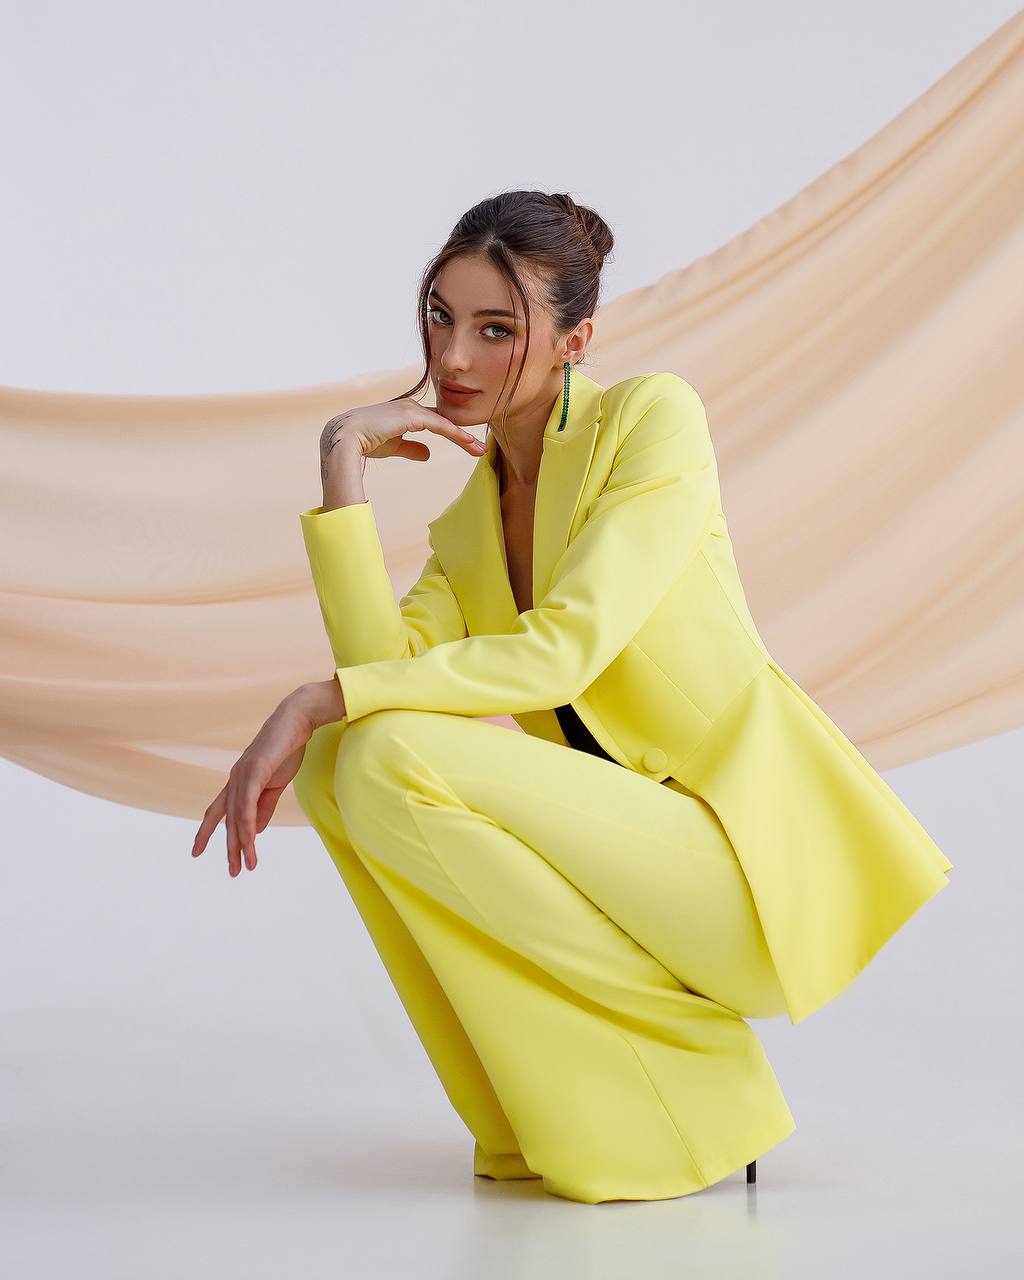 a woman in a yellow suit posing for a picture